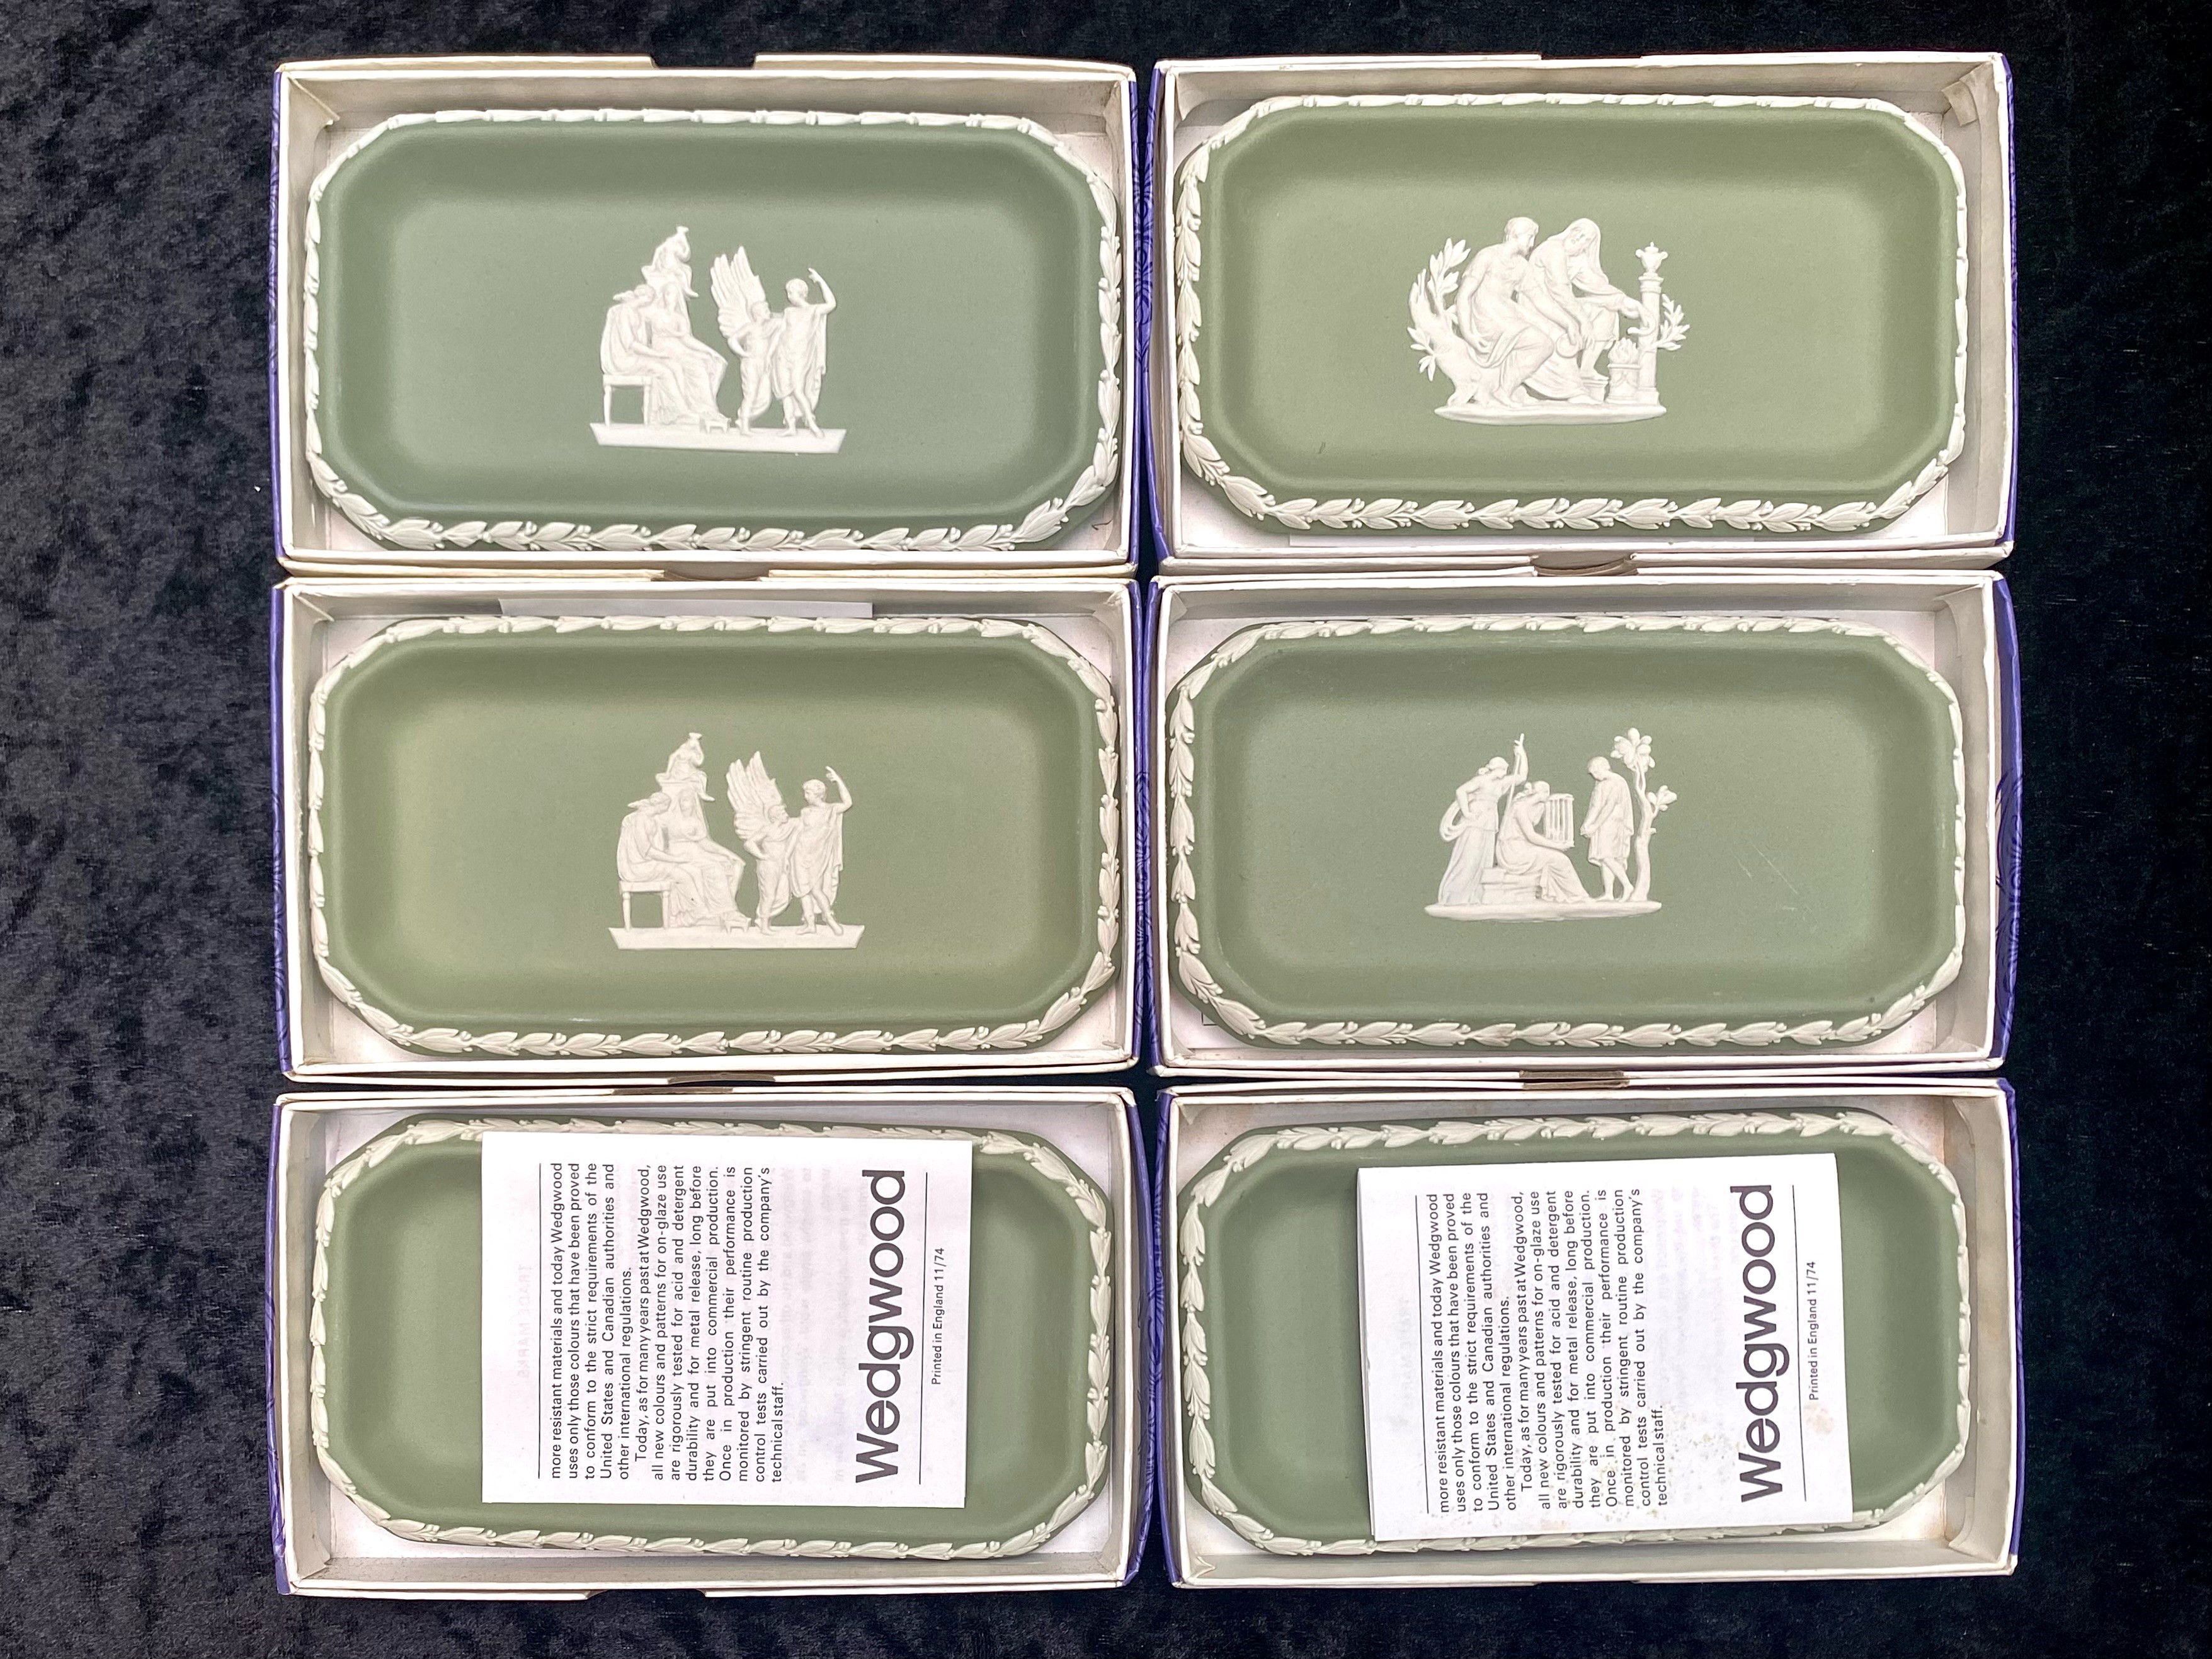 Wedgwood Green Jasper Ware 6 x Oblong Dishes. In very good condition with original box. - Image 4 of 4